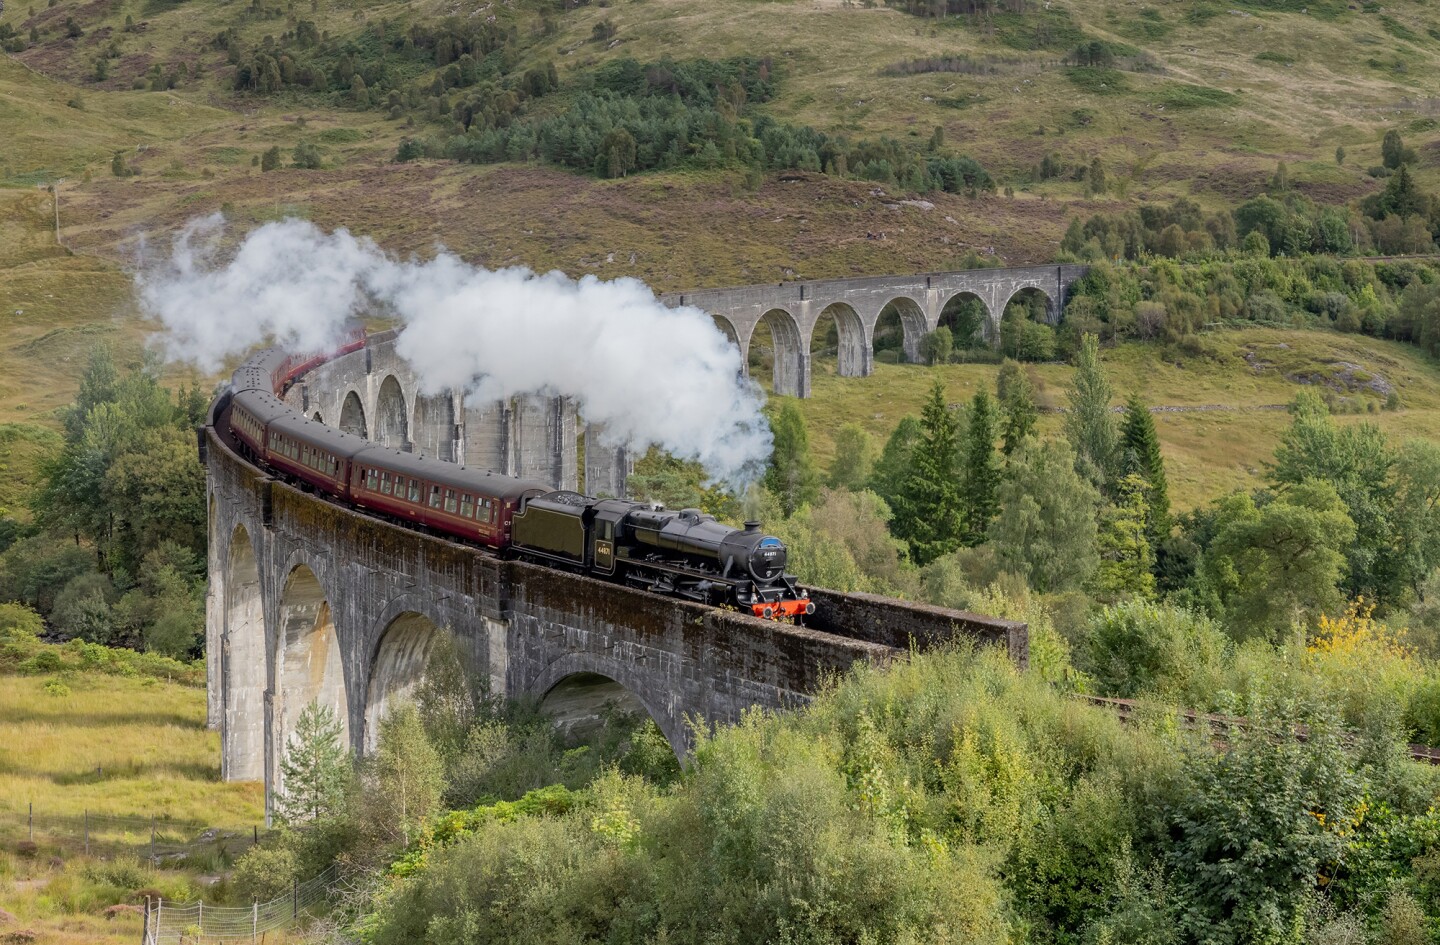 <h2>10. Jacobite Express, Scotland</h2> <p>You probably know this train by its other name: the Hogwarts Express. Yes, this is the steam train that puffs its way over the majestic Glenfinnan Viaduct in the Harry Potter movies. It runs from Fort William to Mallaig, and in between, travelers are whisked past the best of Scotland’s epic Highlands scenery, from Britain’s highest mountain, Ben Nevis, to its deepest freshwater loch, Loch Morar. On arrival in Mallaig, you can continue the journey by getting a ferry to the Isle of Skye, which has miles of hiking trails through fairy-tale landscapes.</p>